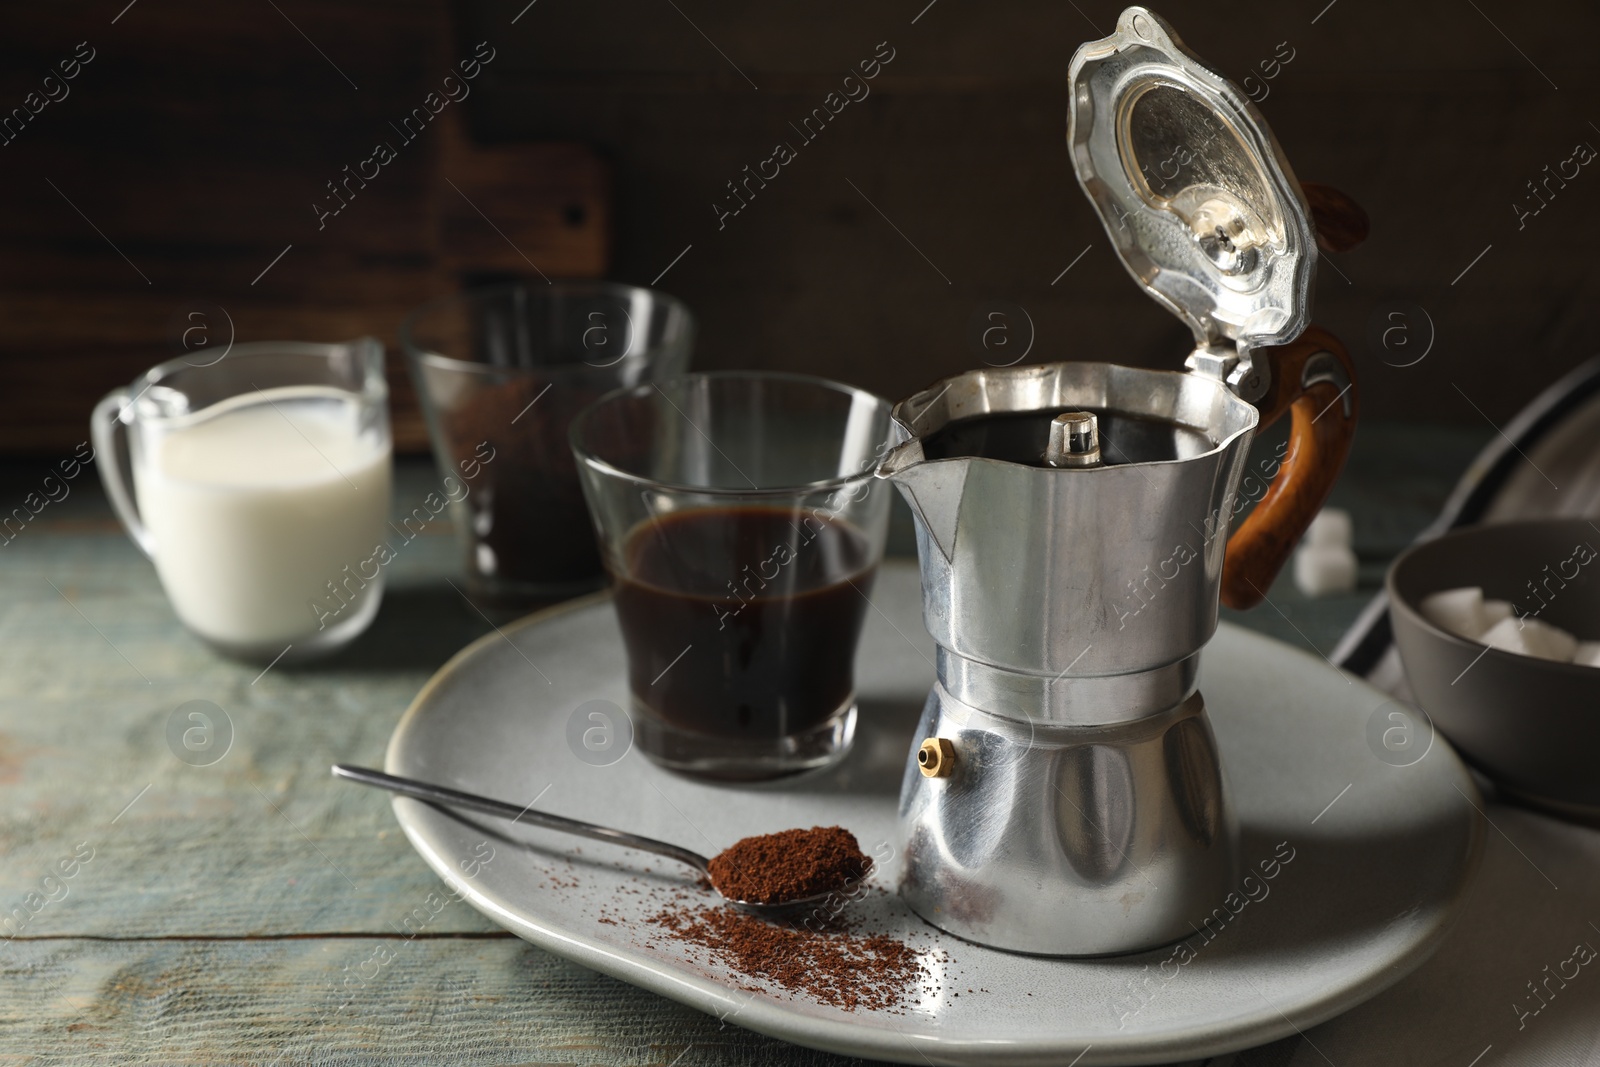 Photo of Brewed coffee in moka pot and glass on rustic wooden table